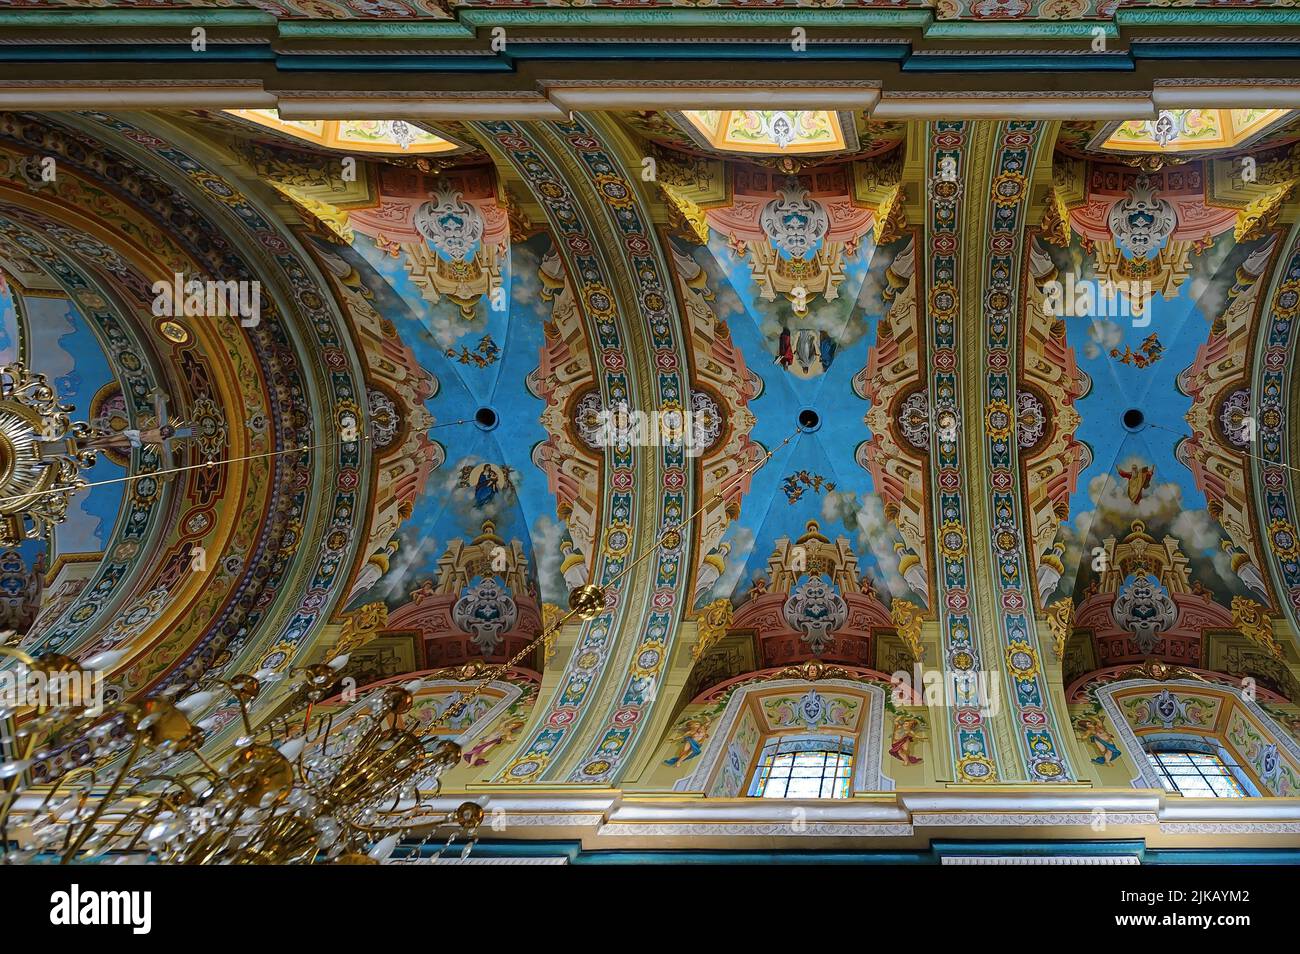 Ceiling of Cathedral of the Resurrection of Christ, aka Ivano-Frankivsk Jesuit Church in Ukraine Stock Photo